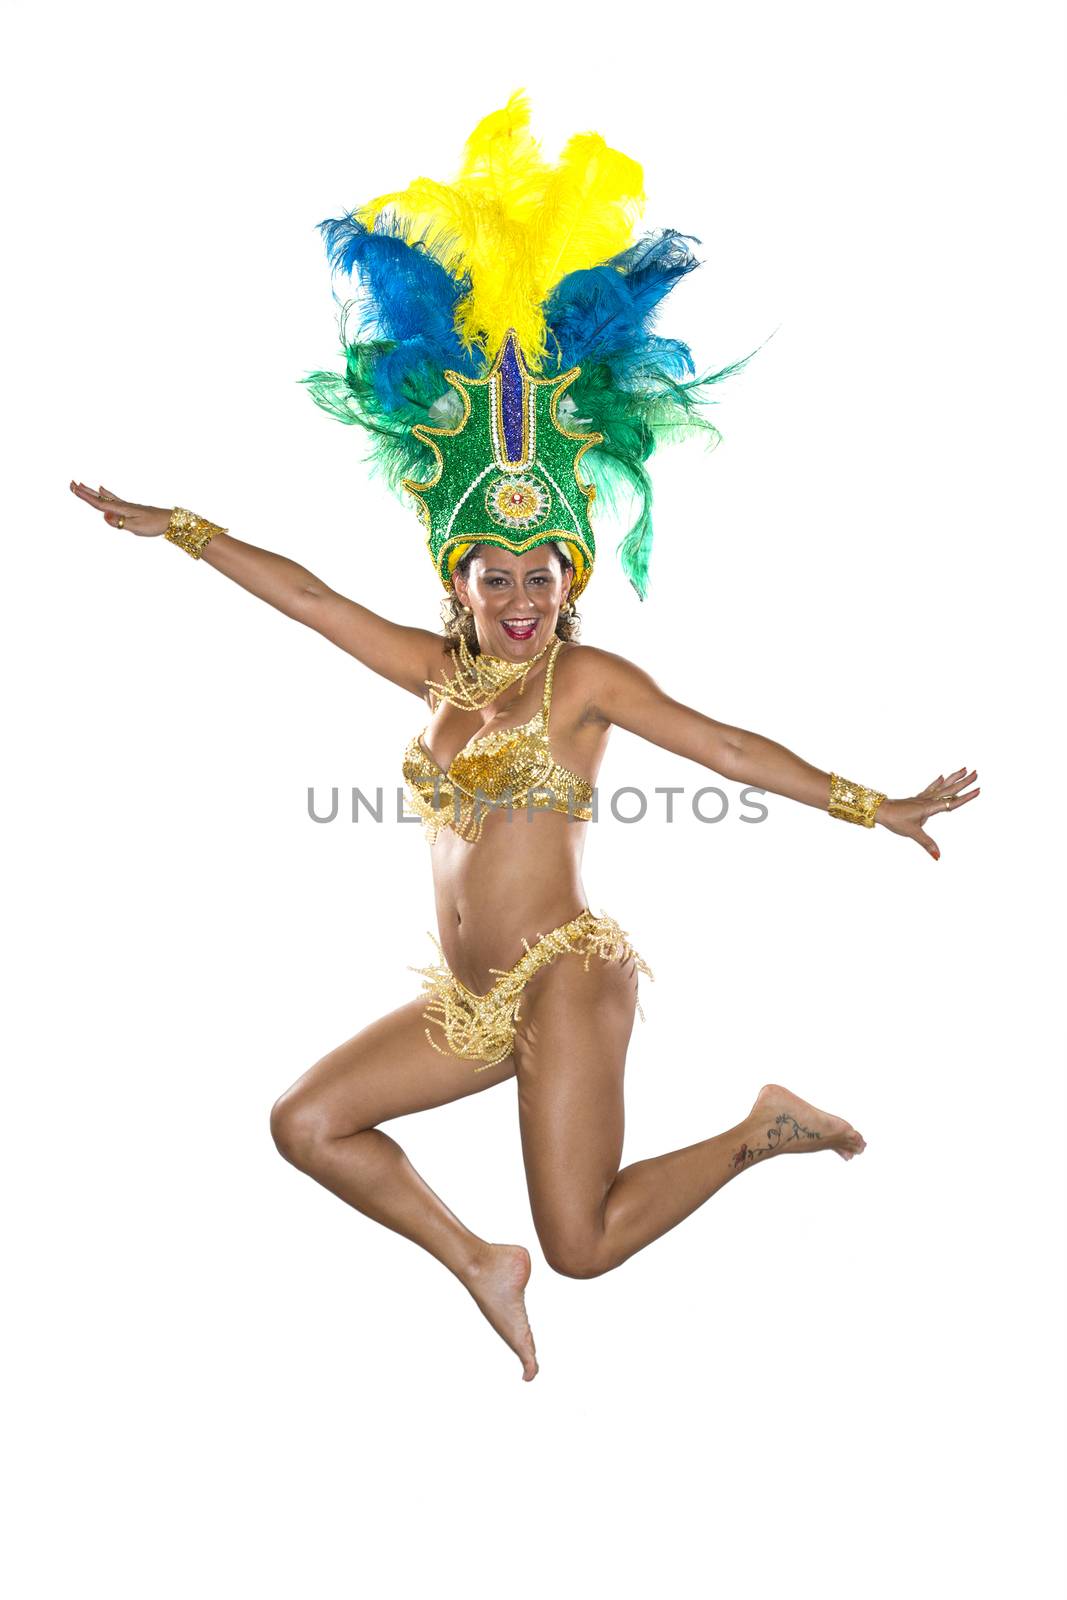 Carnival, Samba Dancer, dressed in feather costume